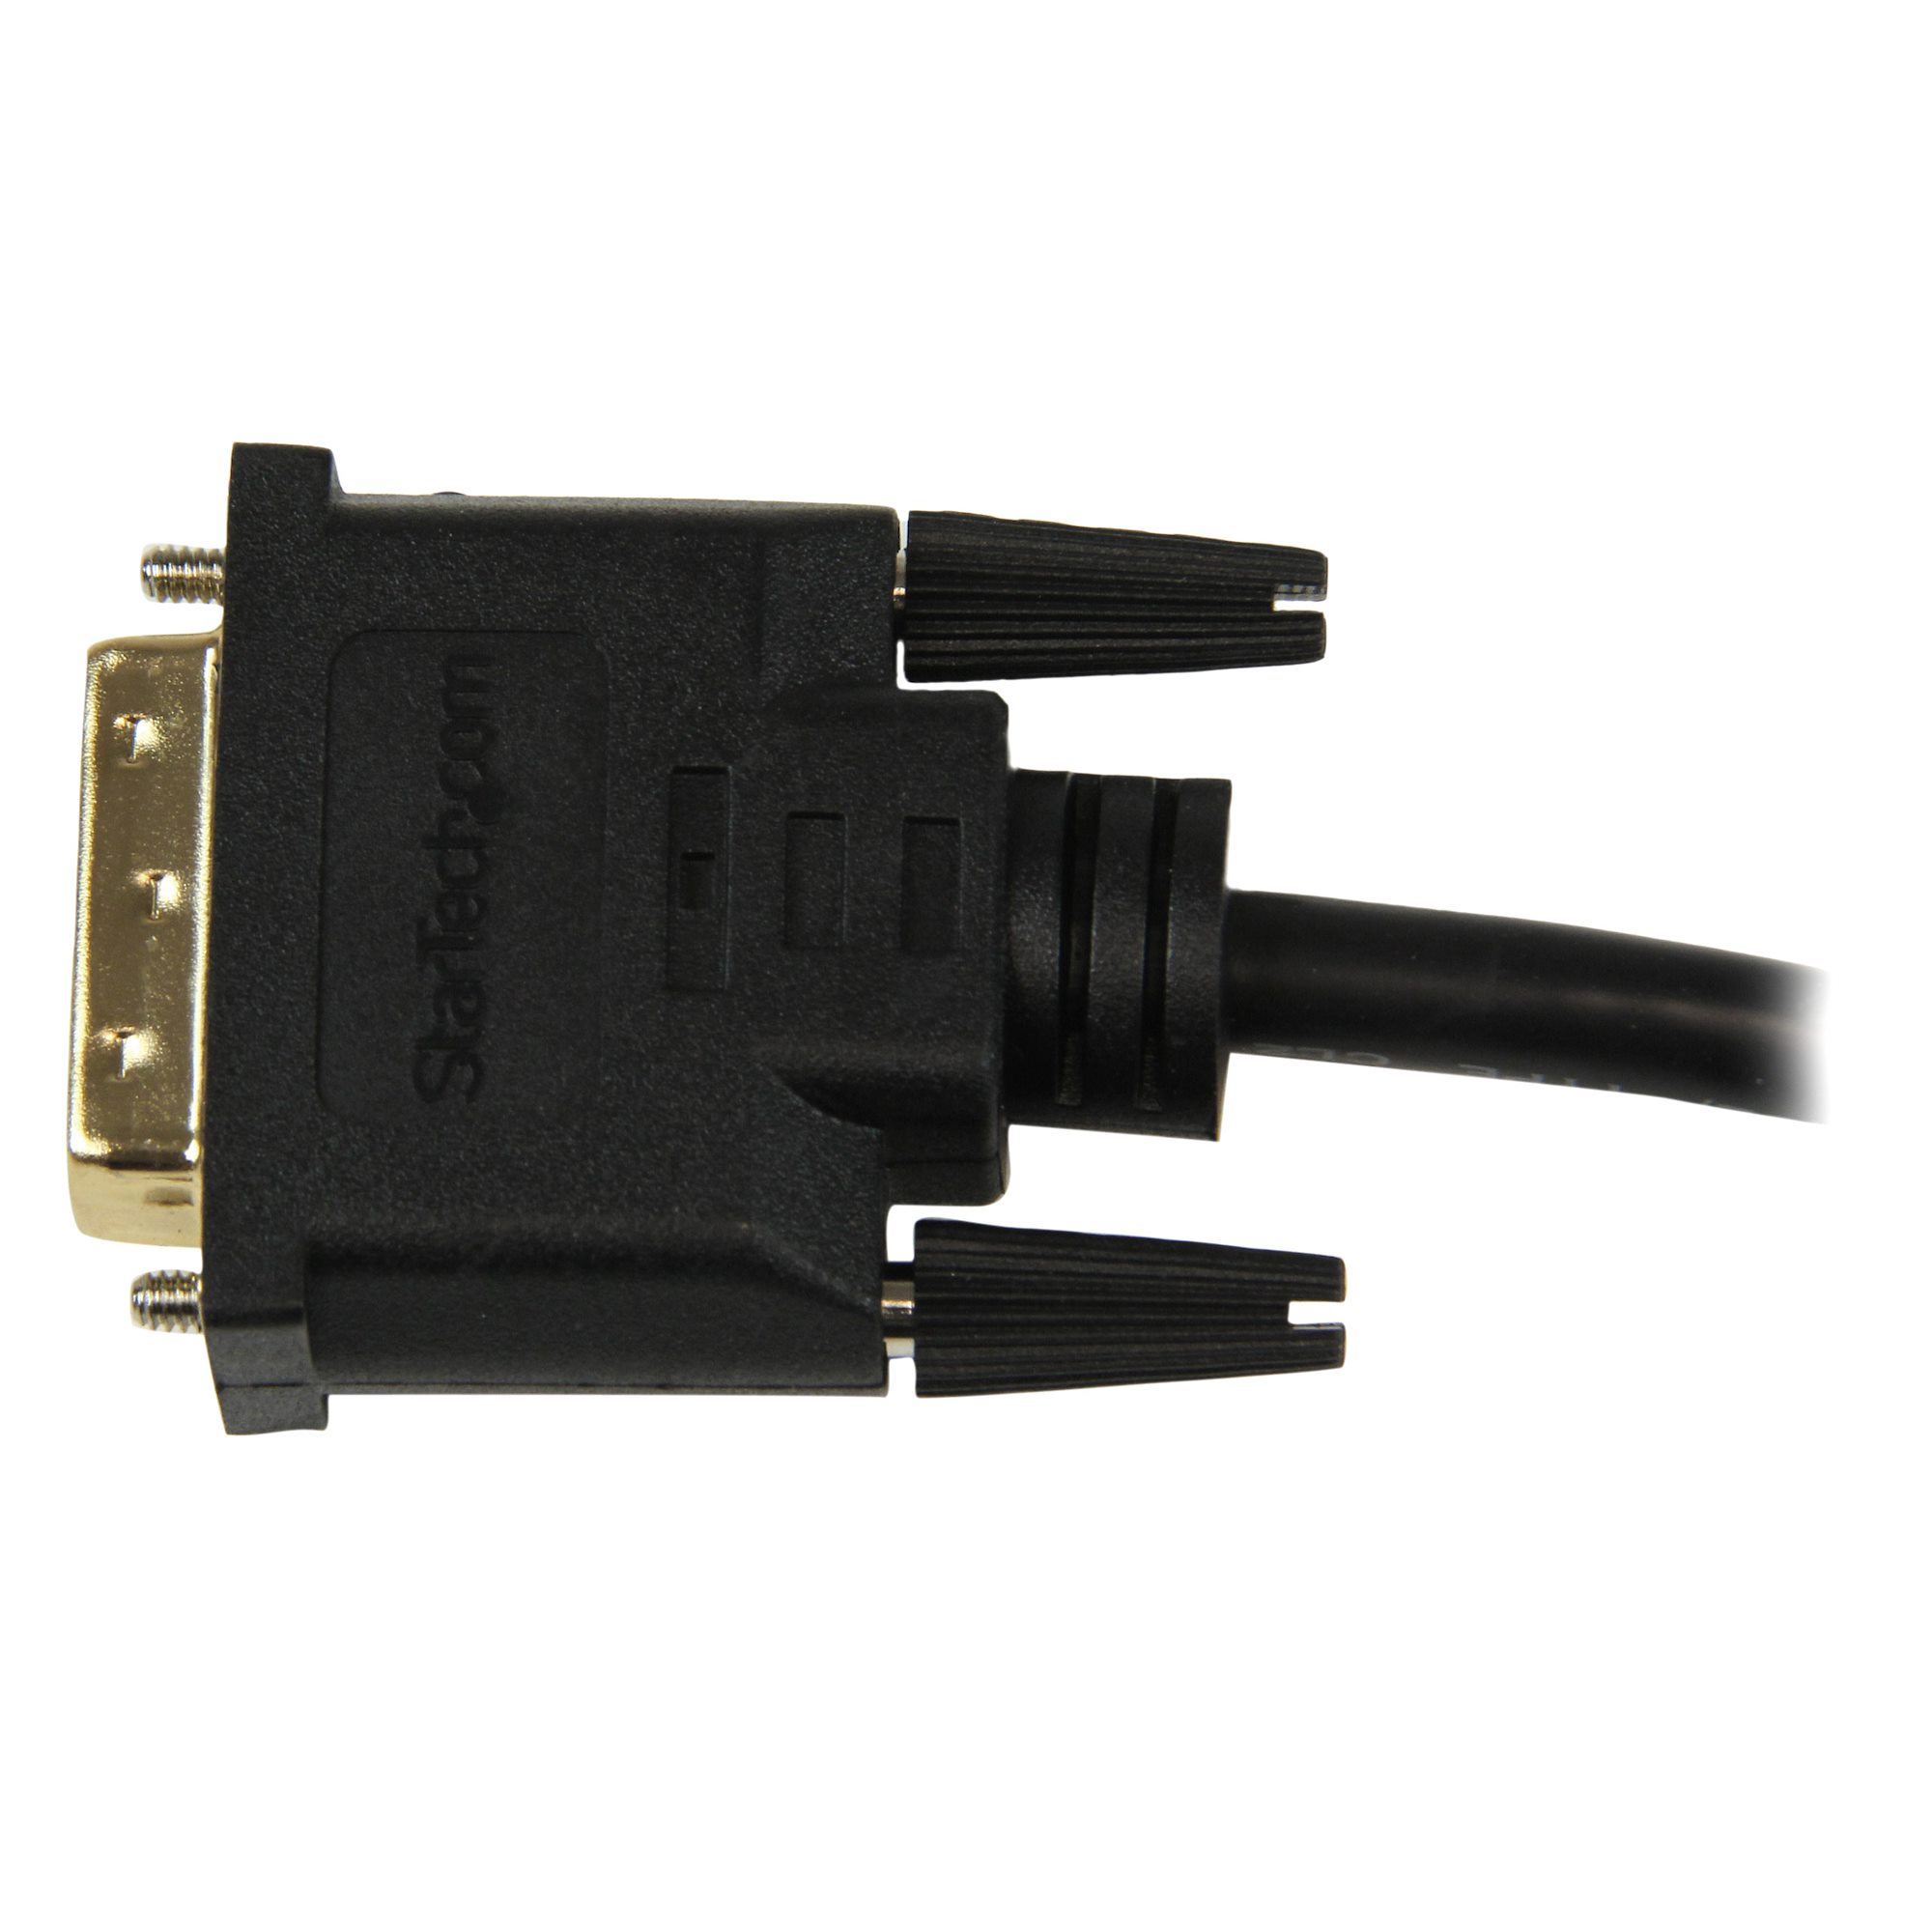 klap spray Kostbar HDMI® to DVI-D Video Cable Adapter - F/M - HDMI® Cables & HDMI Adapters |  StarTech.com